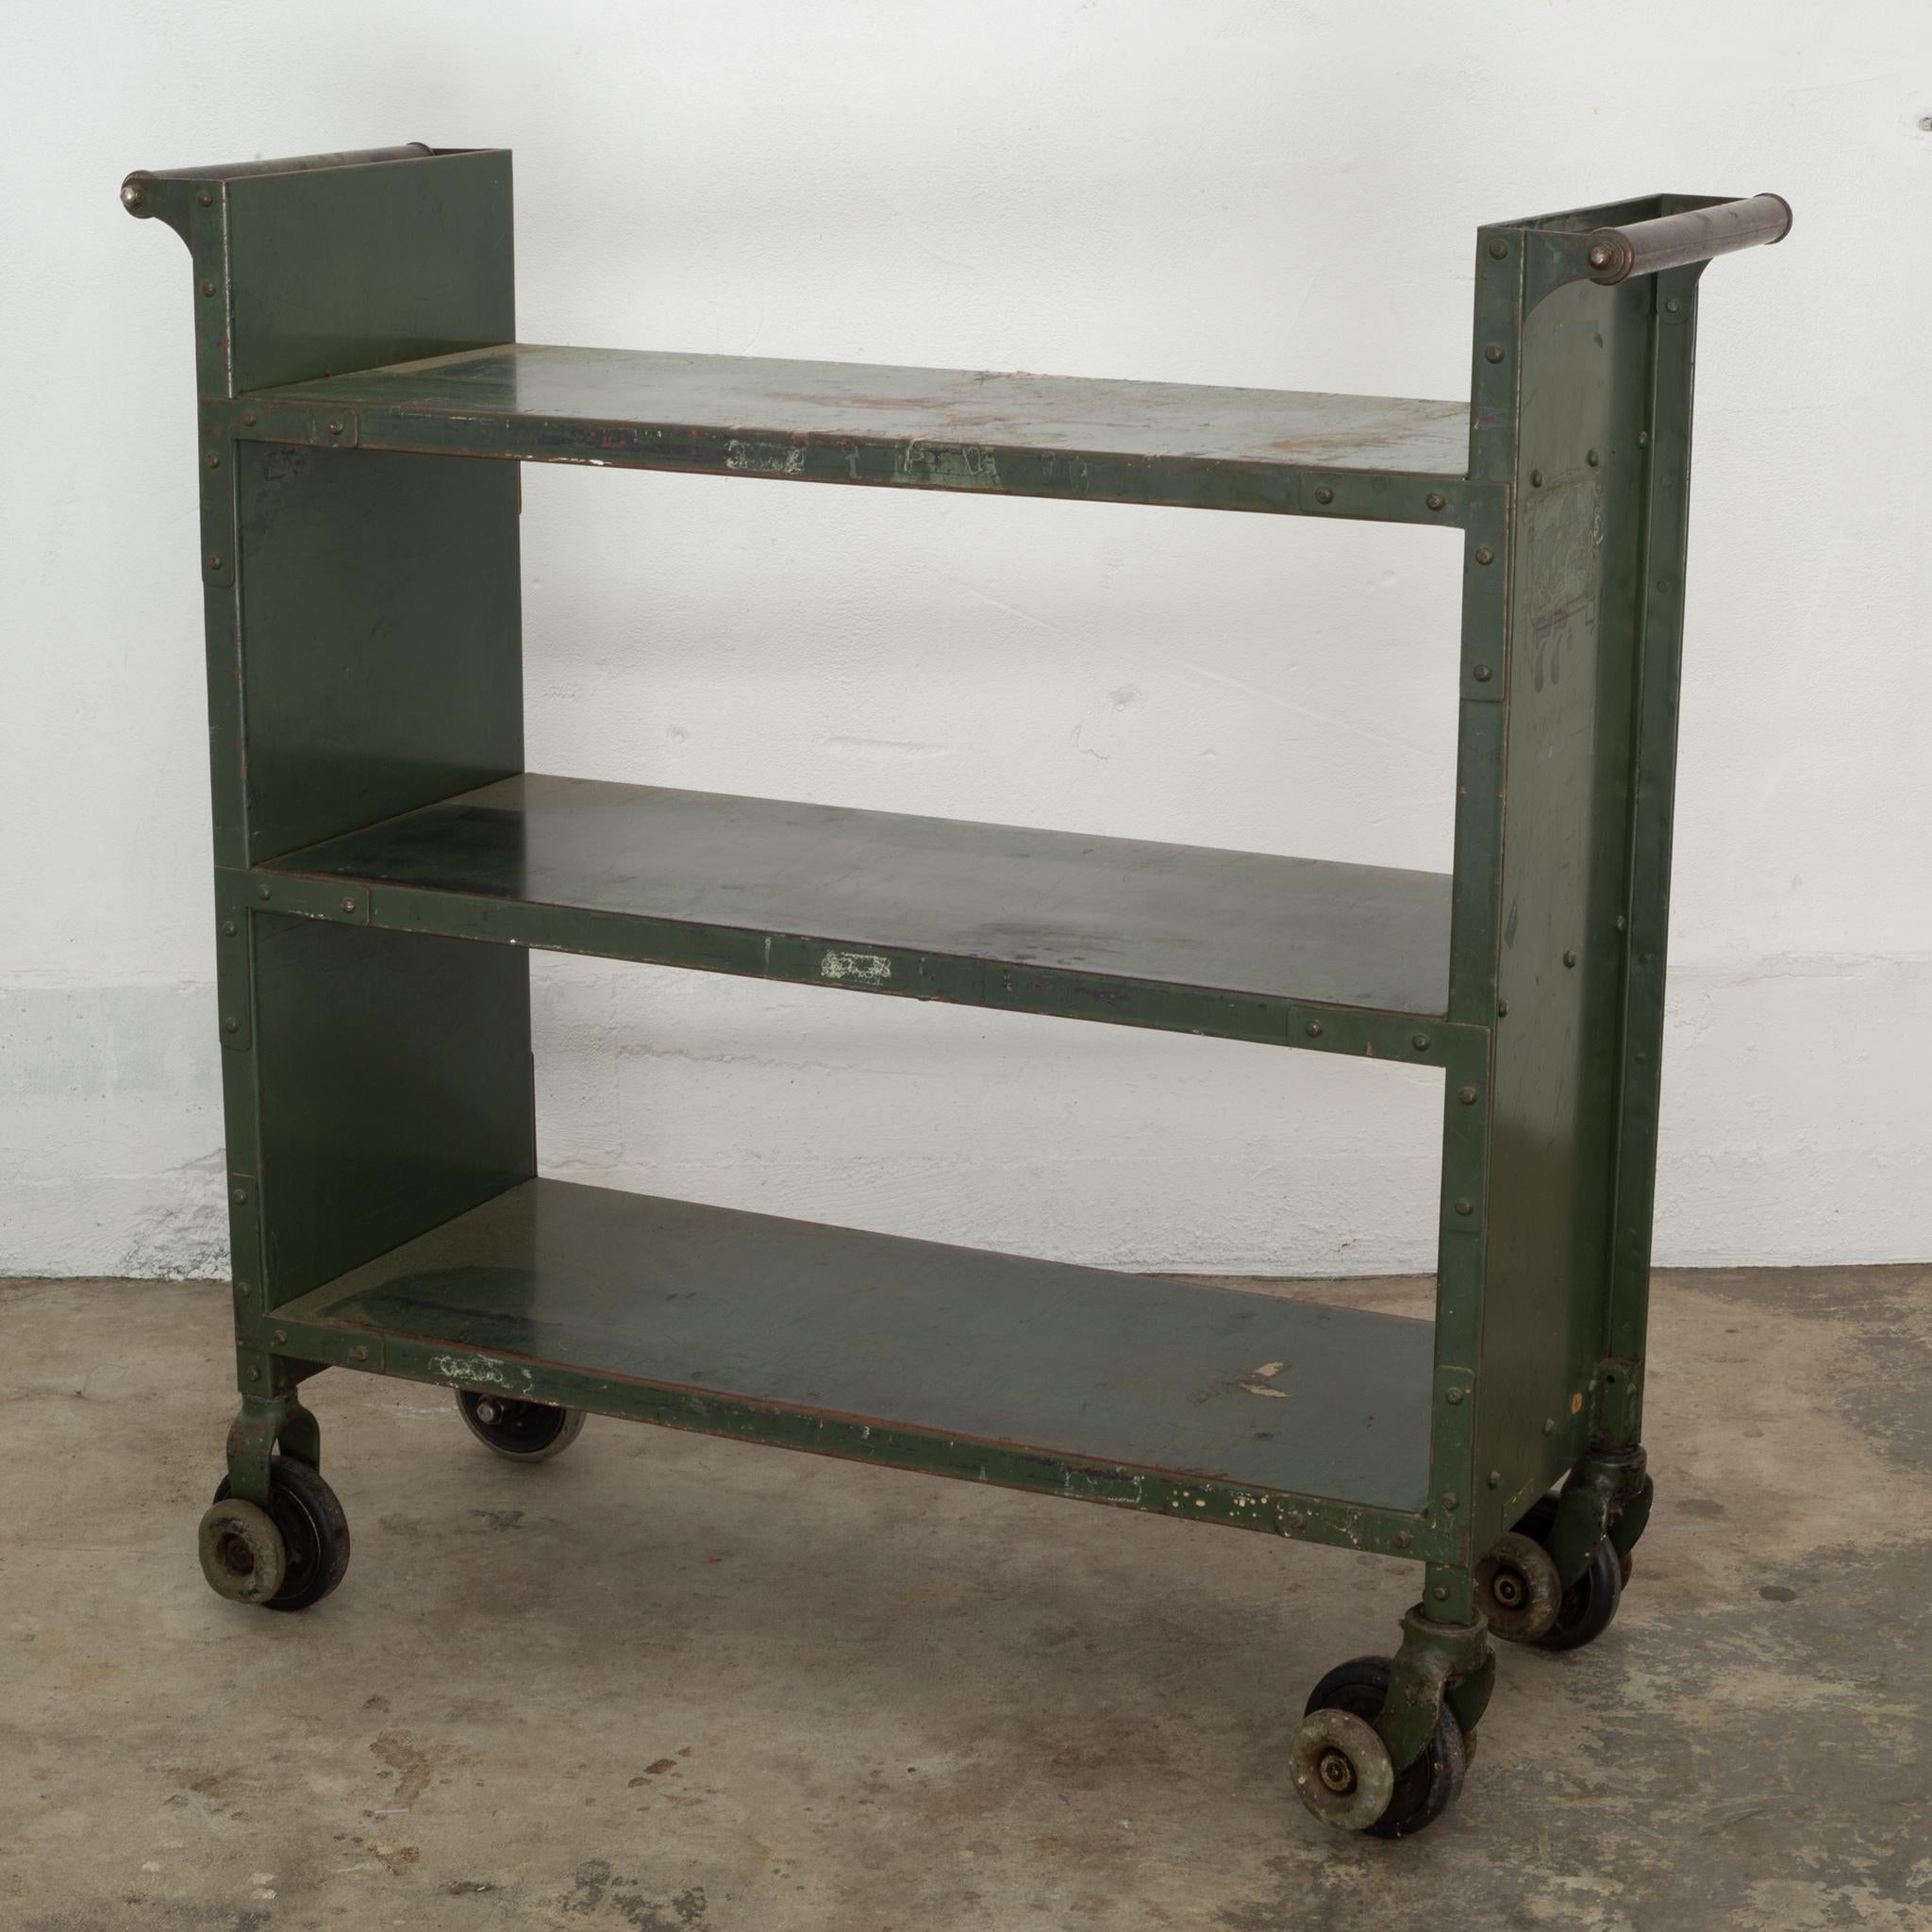 About

An industrial metal rolling library cart with two steel handles and multiple sets of rubber wheels on each foot. The wheels fit on a tracks that ran between the library stacks to reshelve books simpler, faster and quieter. The wheels on one